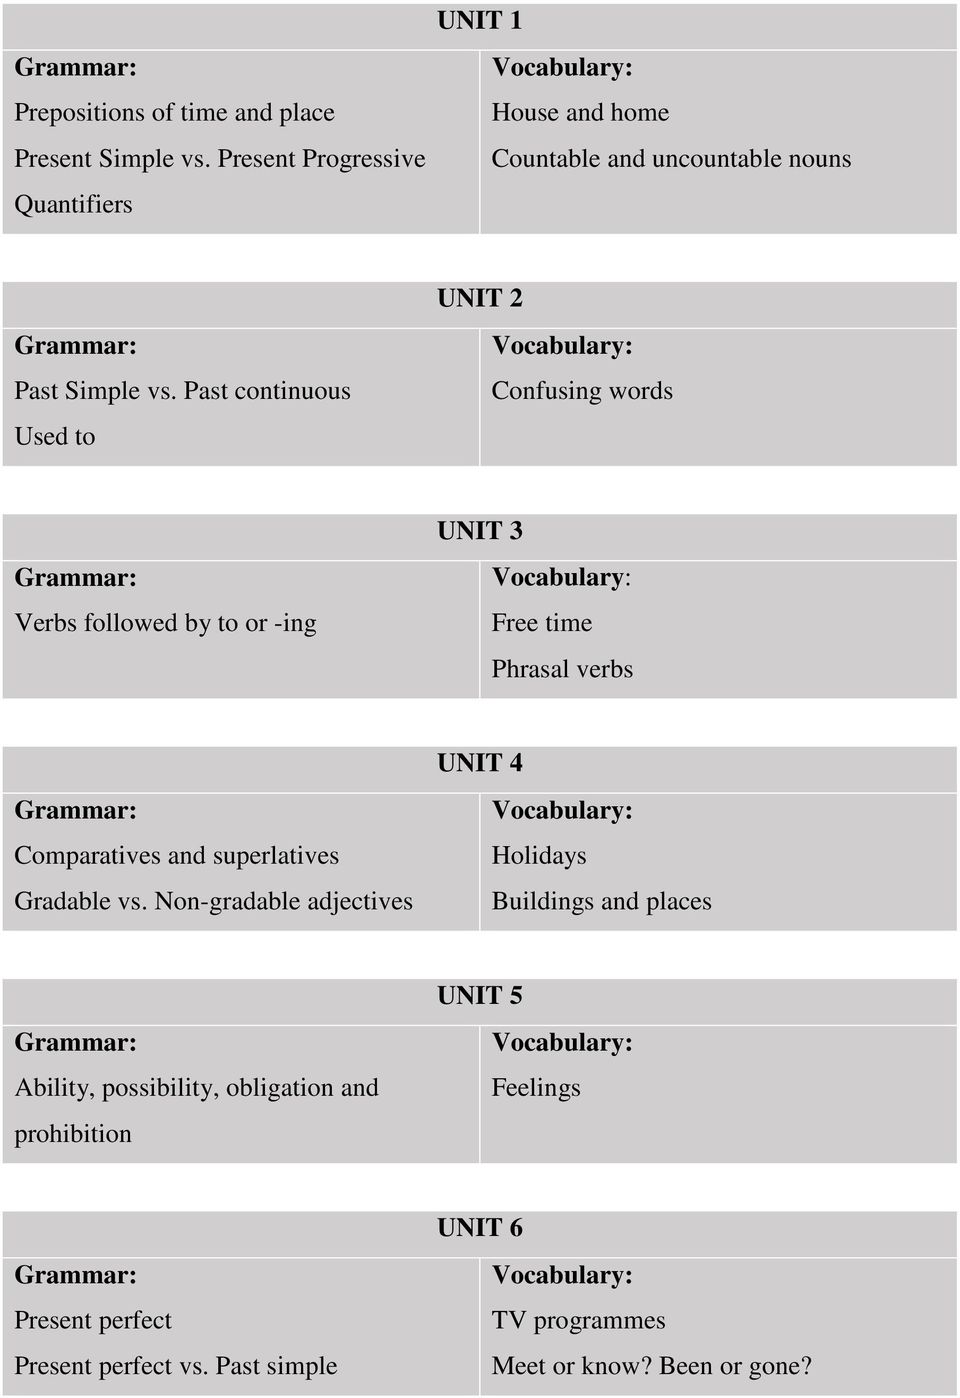 Past continuous Used to UNIT 2 Confusing words Verbs followed by to or -ing UNIT 3 Free time Phrasal verbs Comparatives and